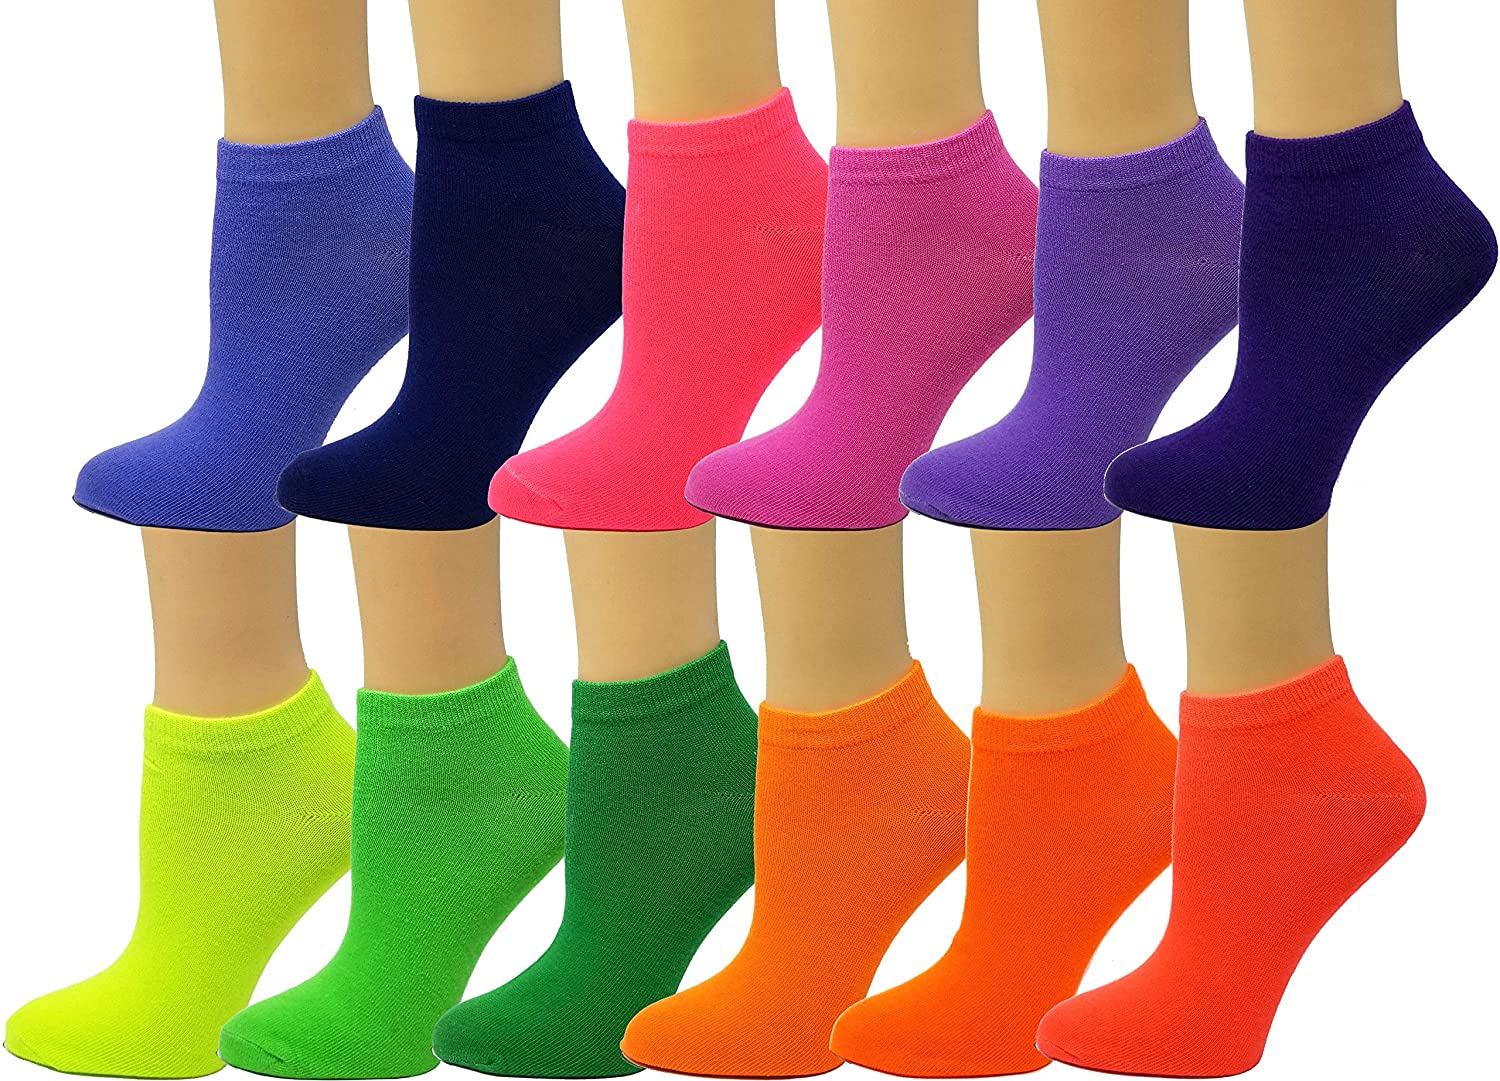 Debra Weitzner Womens Cotton Ankle Socks 12 Pairs Low-Cut Socks Colorful Casual No-Show Socks 